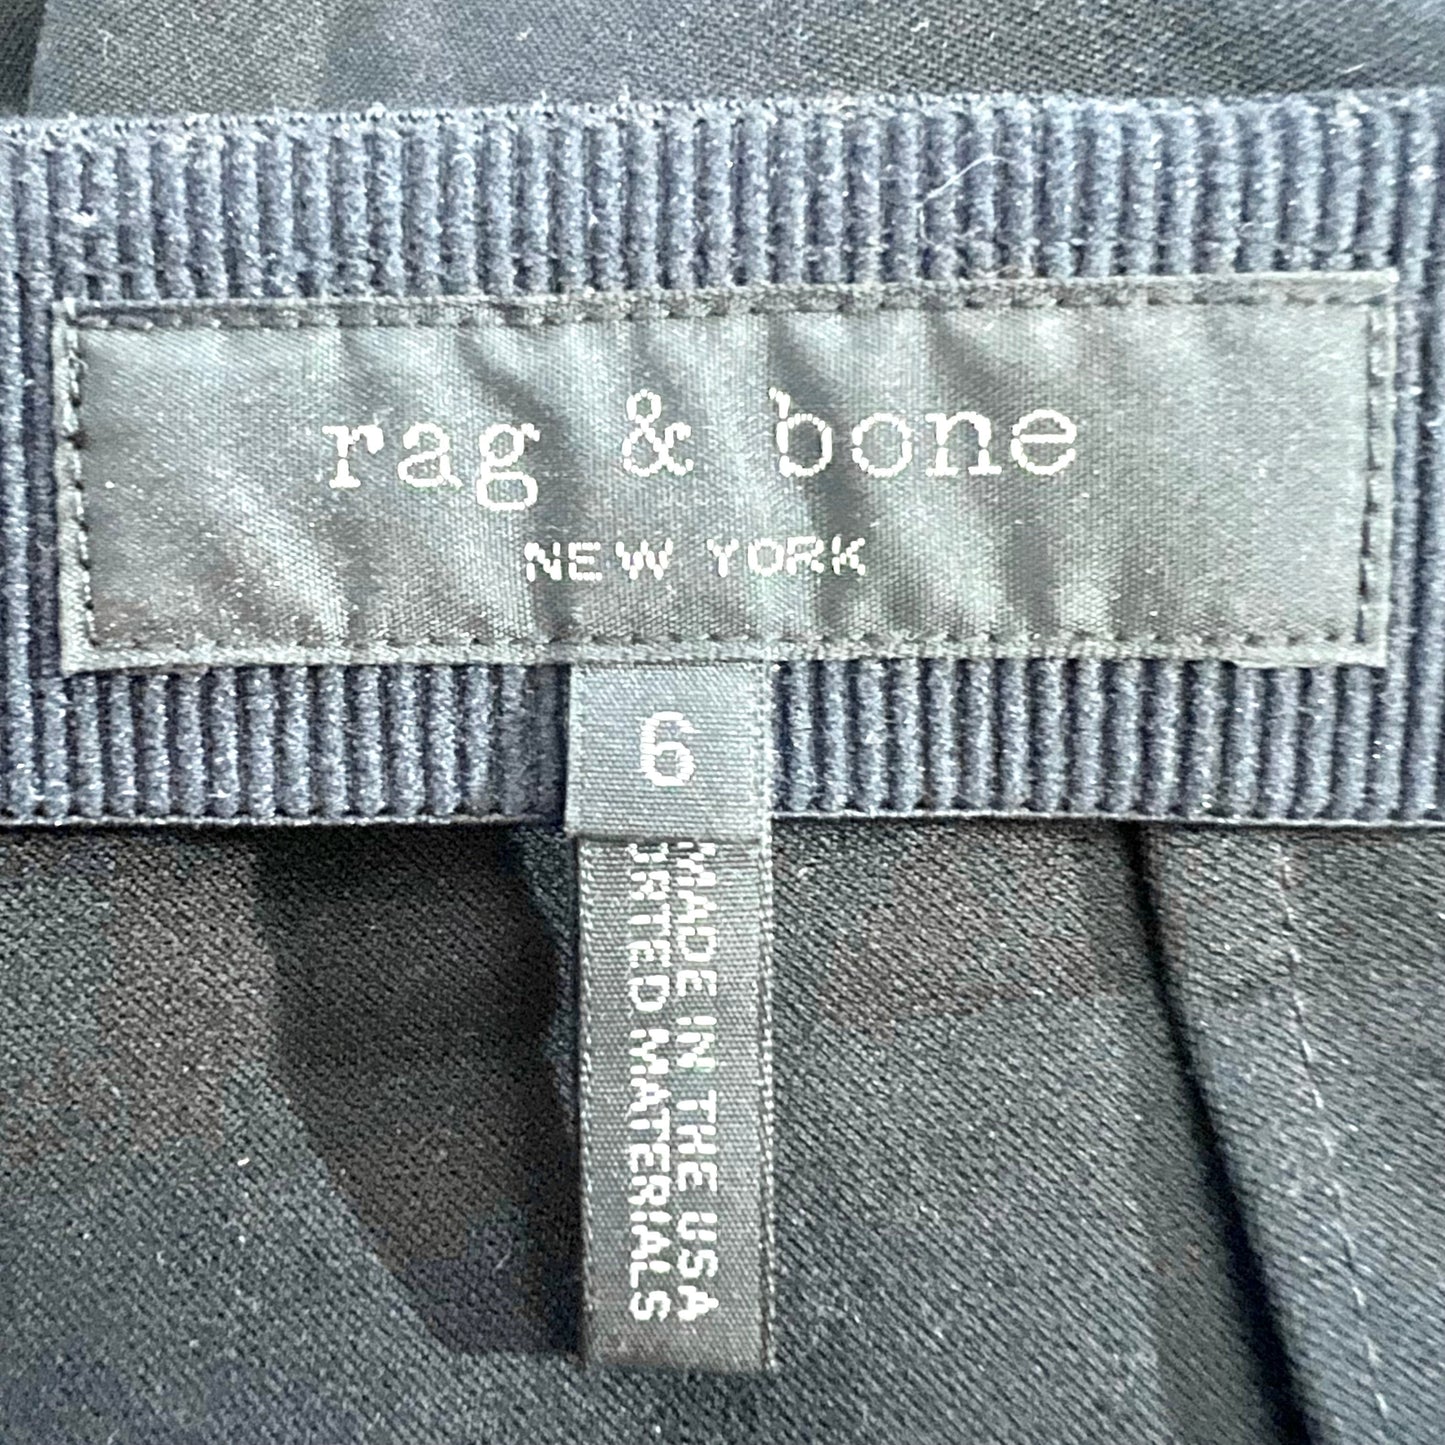 Pants Designer By Rag And Bone  Size: 6